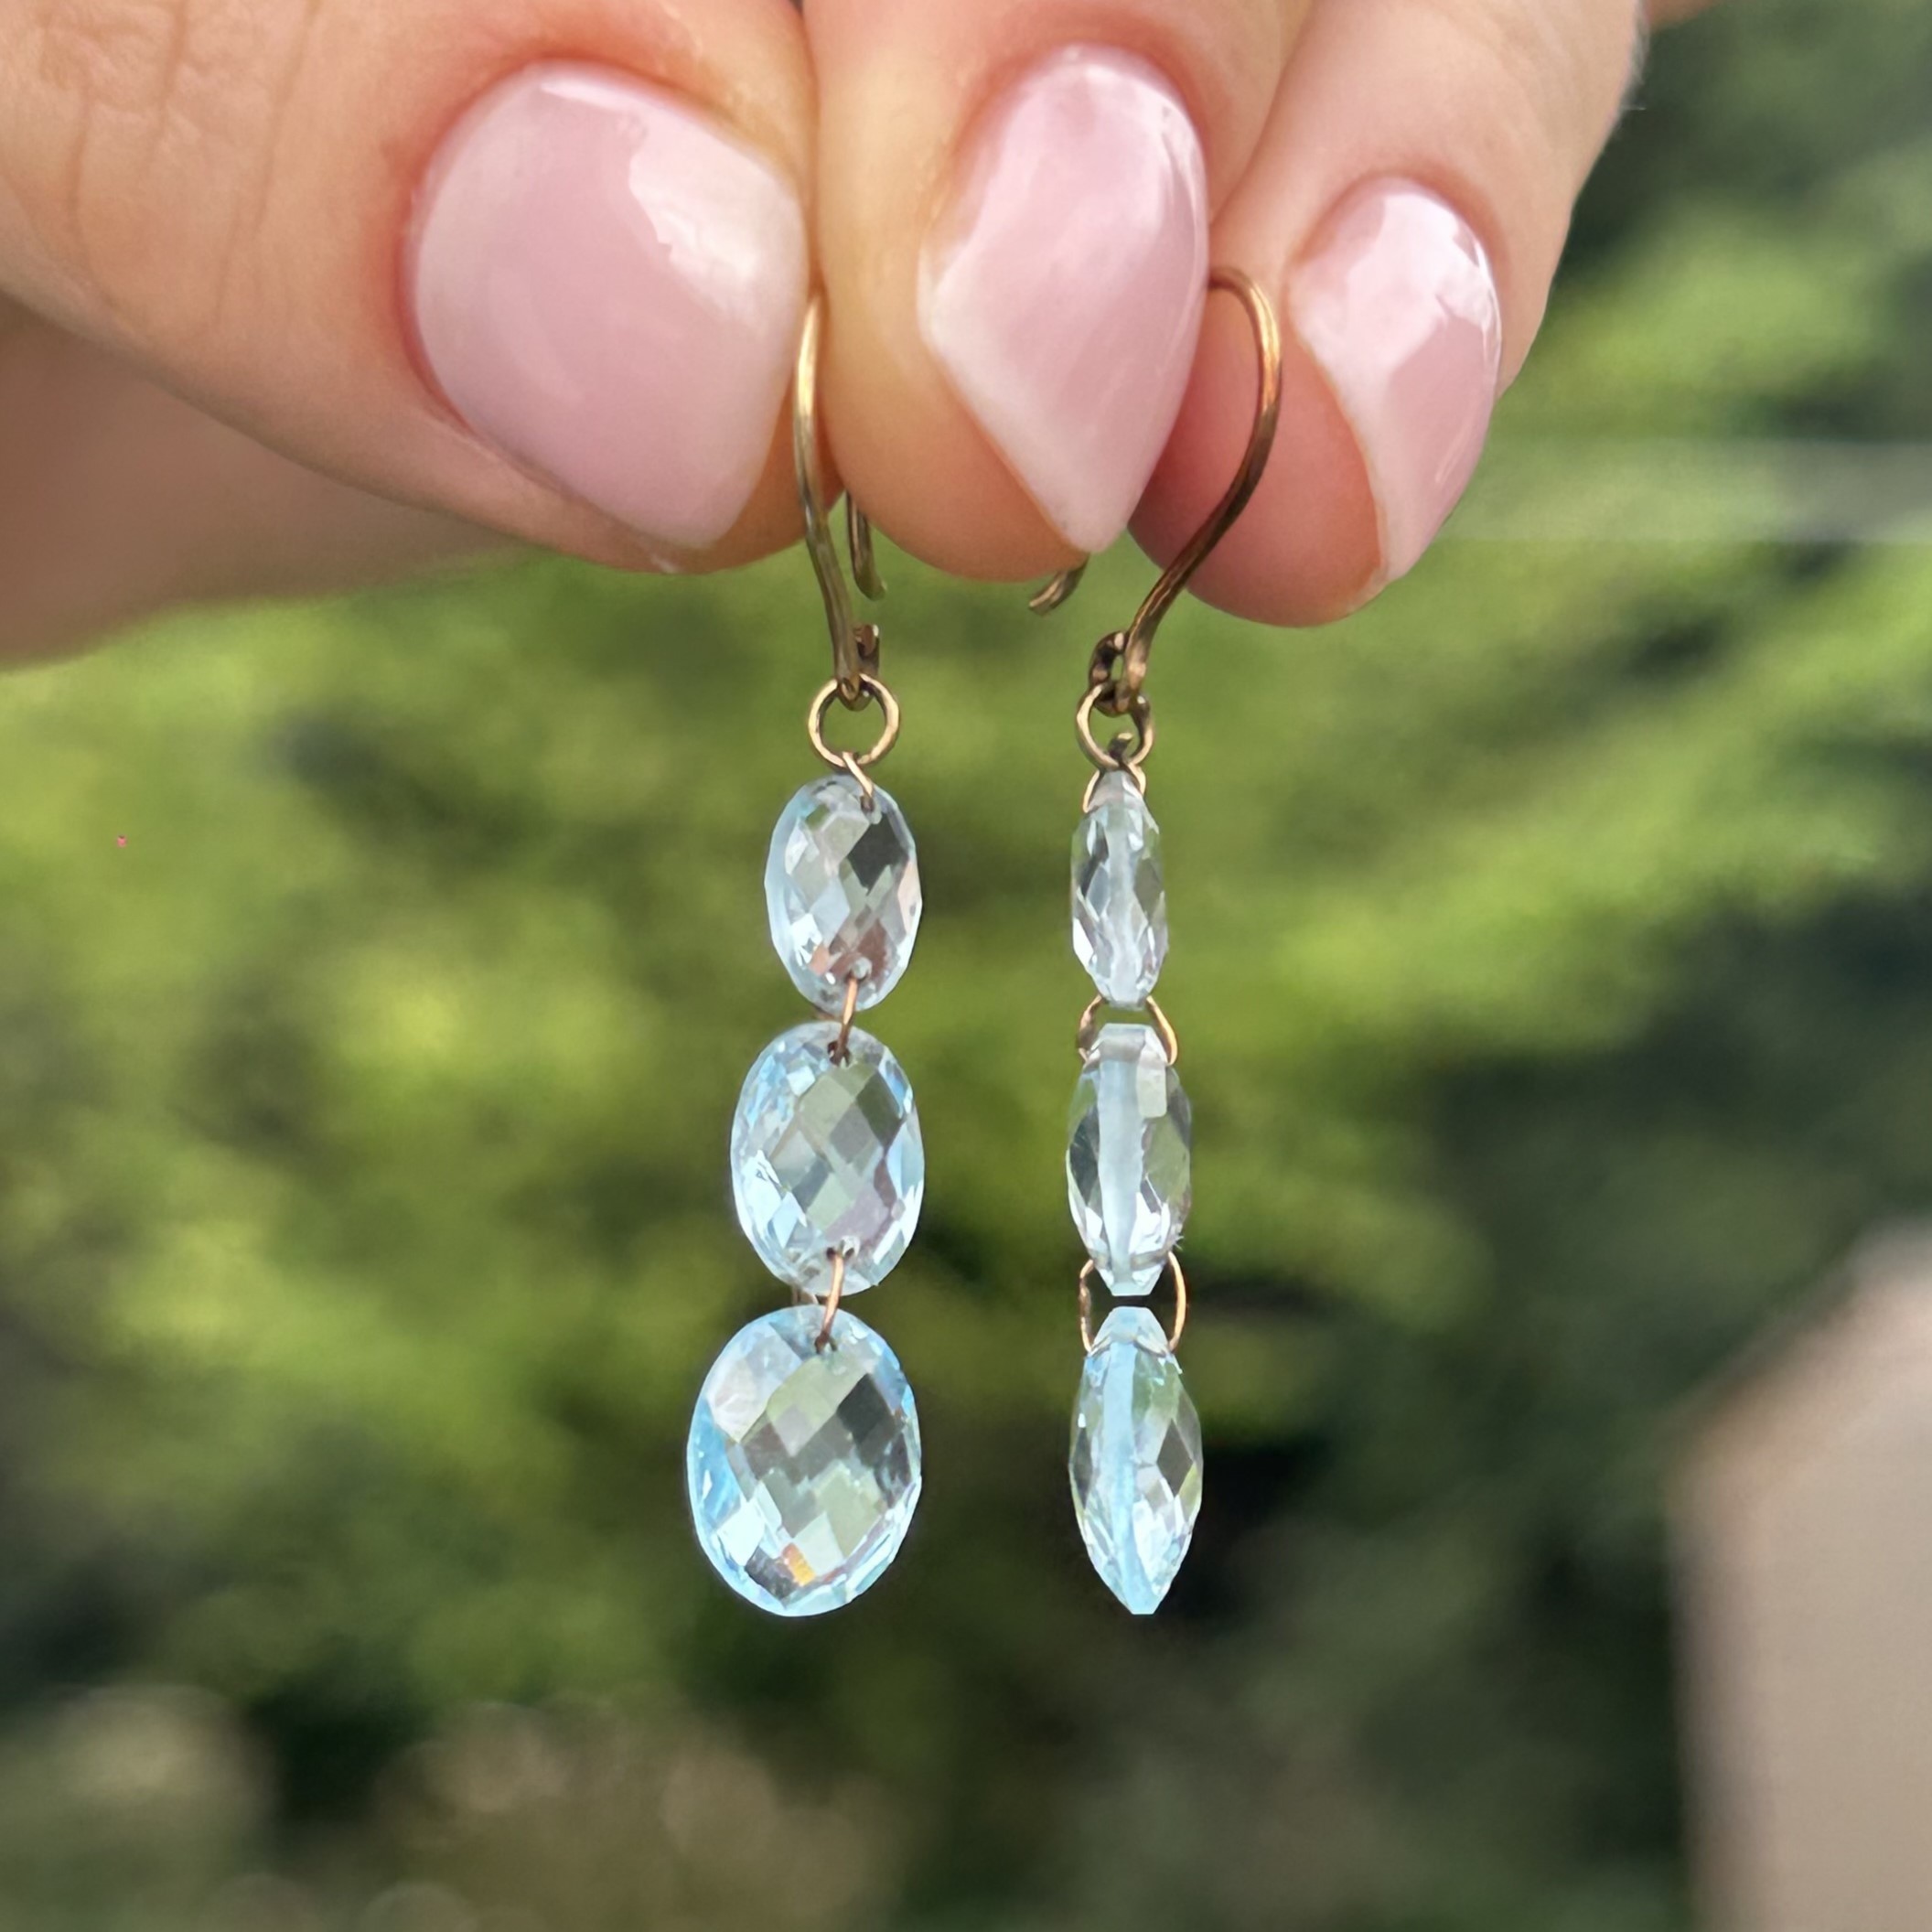 9ct gold faceted blue topaz drop earrings with French hooks 2.1 g